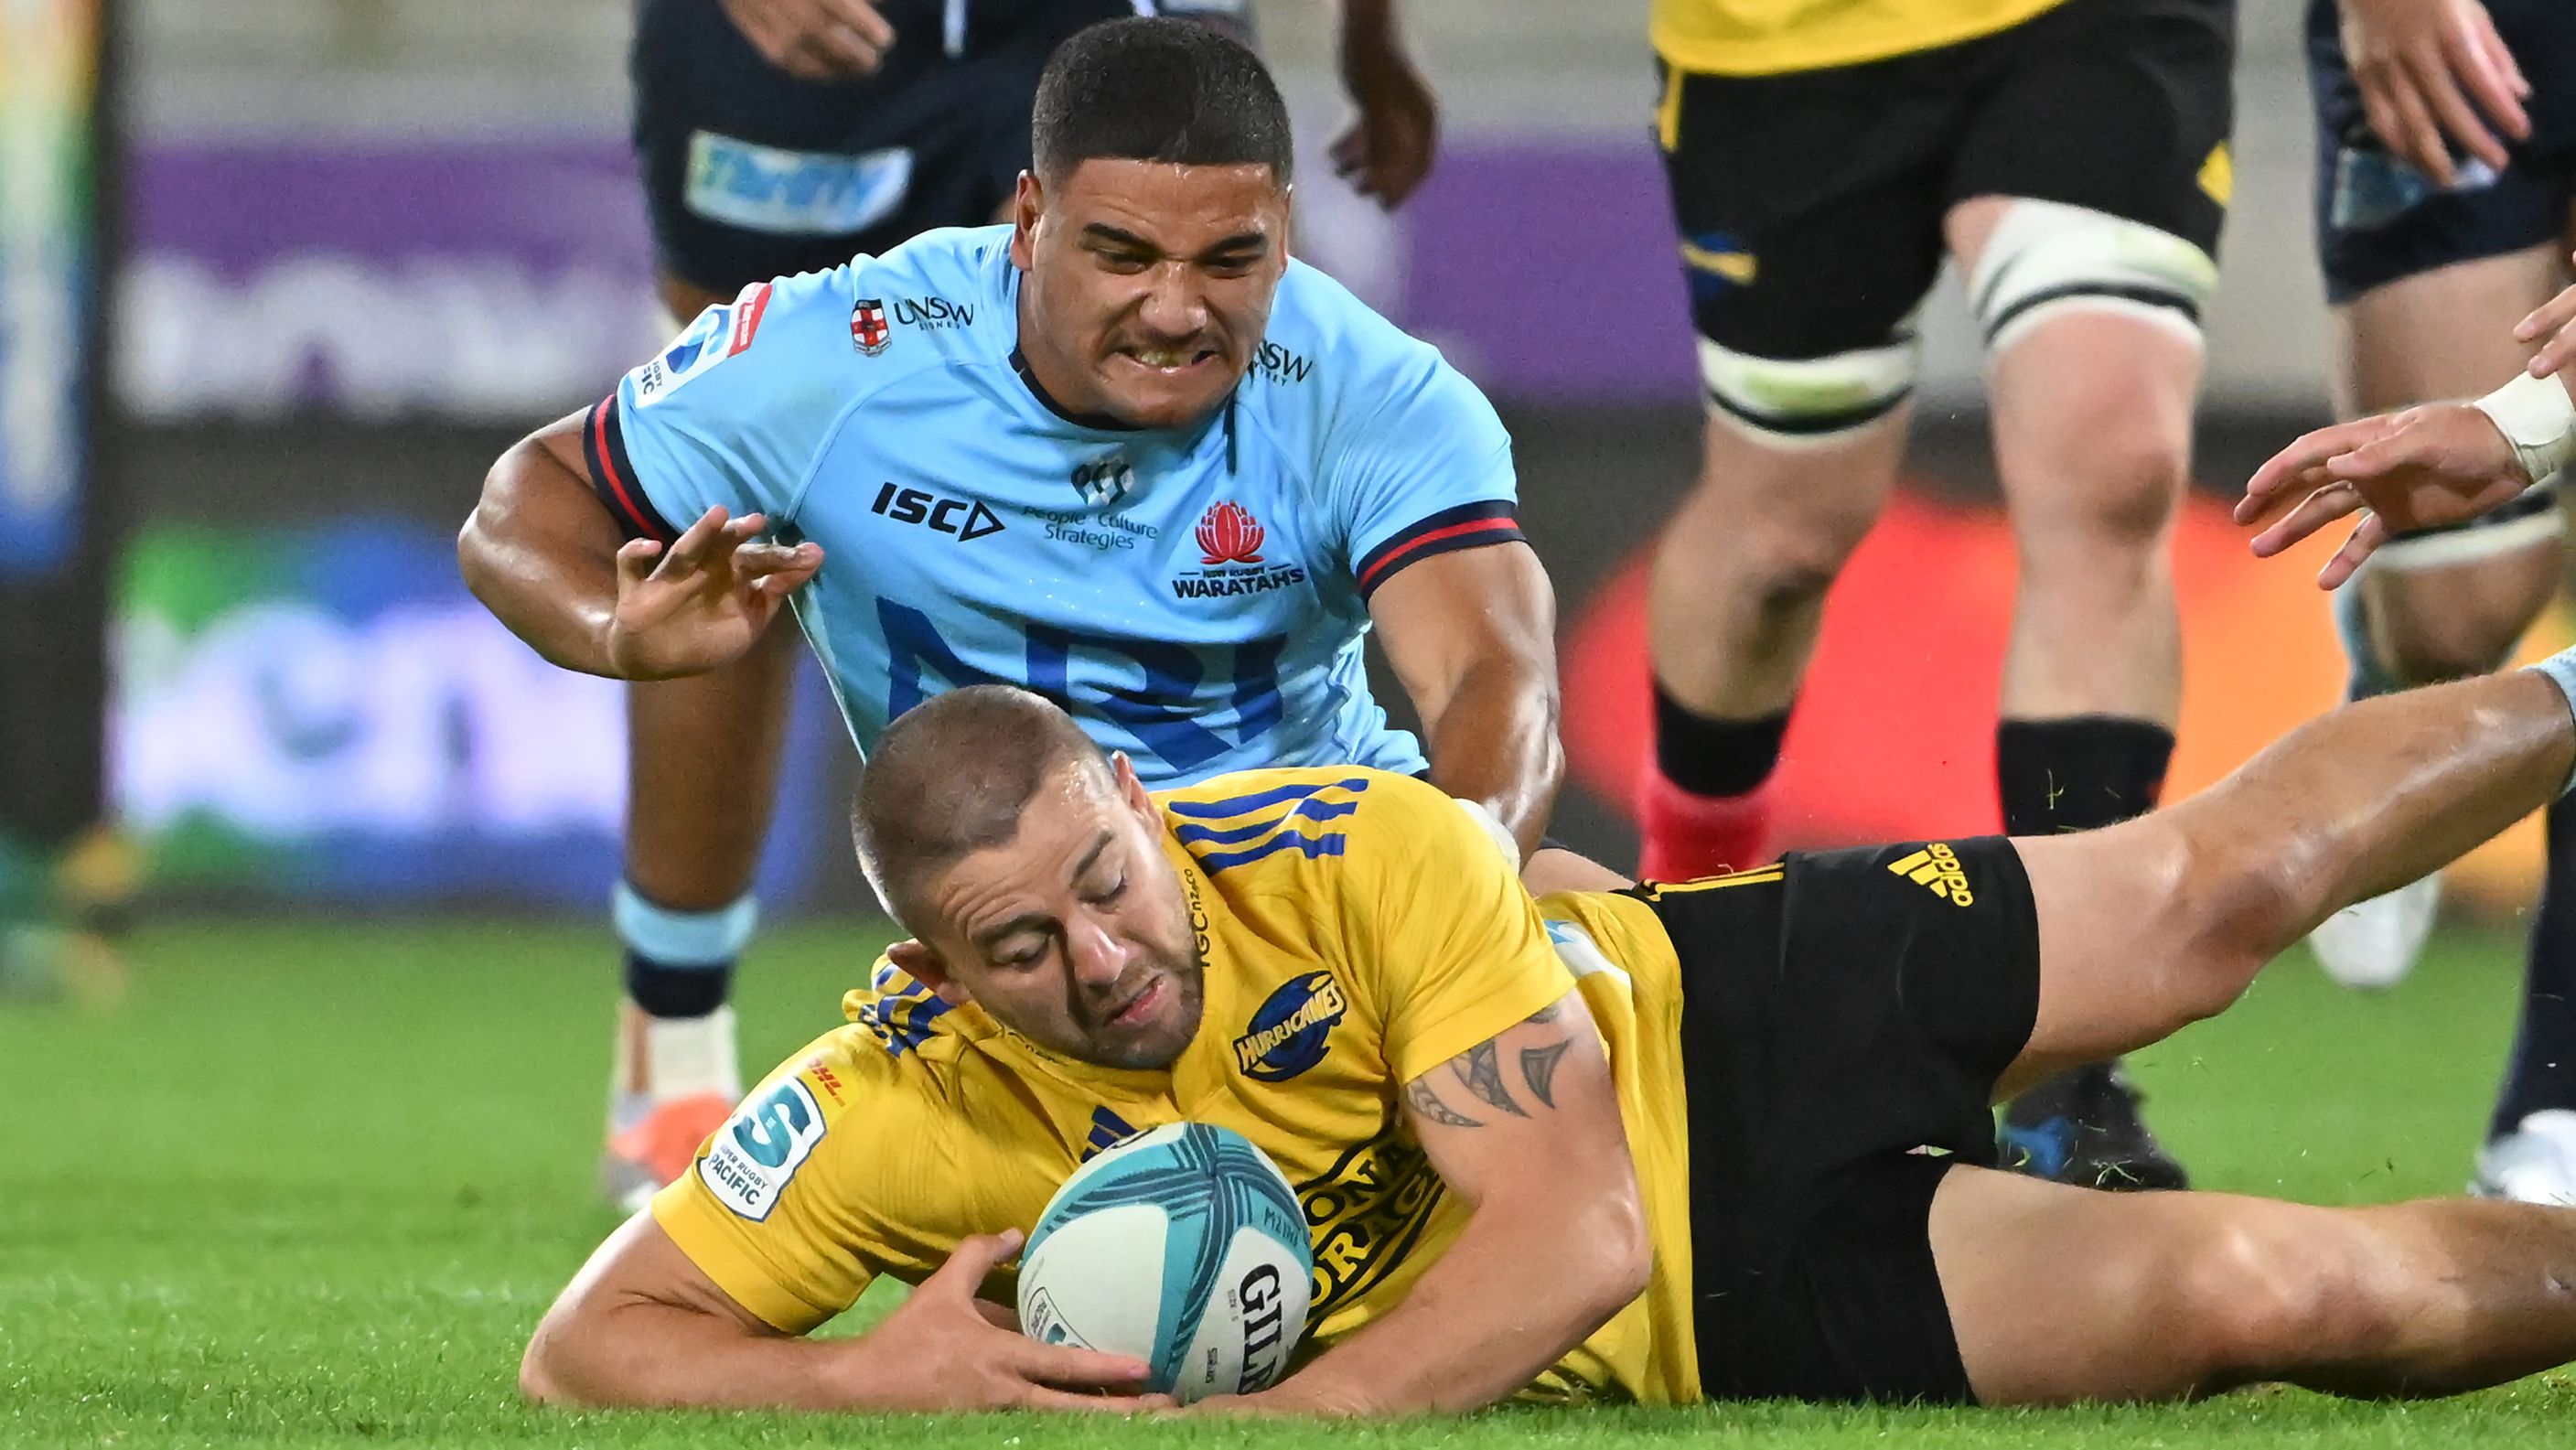 Dane Coles of the Hurricanes and Mosese Tuipulotu of the Waratahs compete for loose ball.